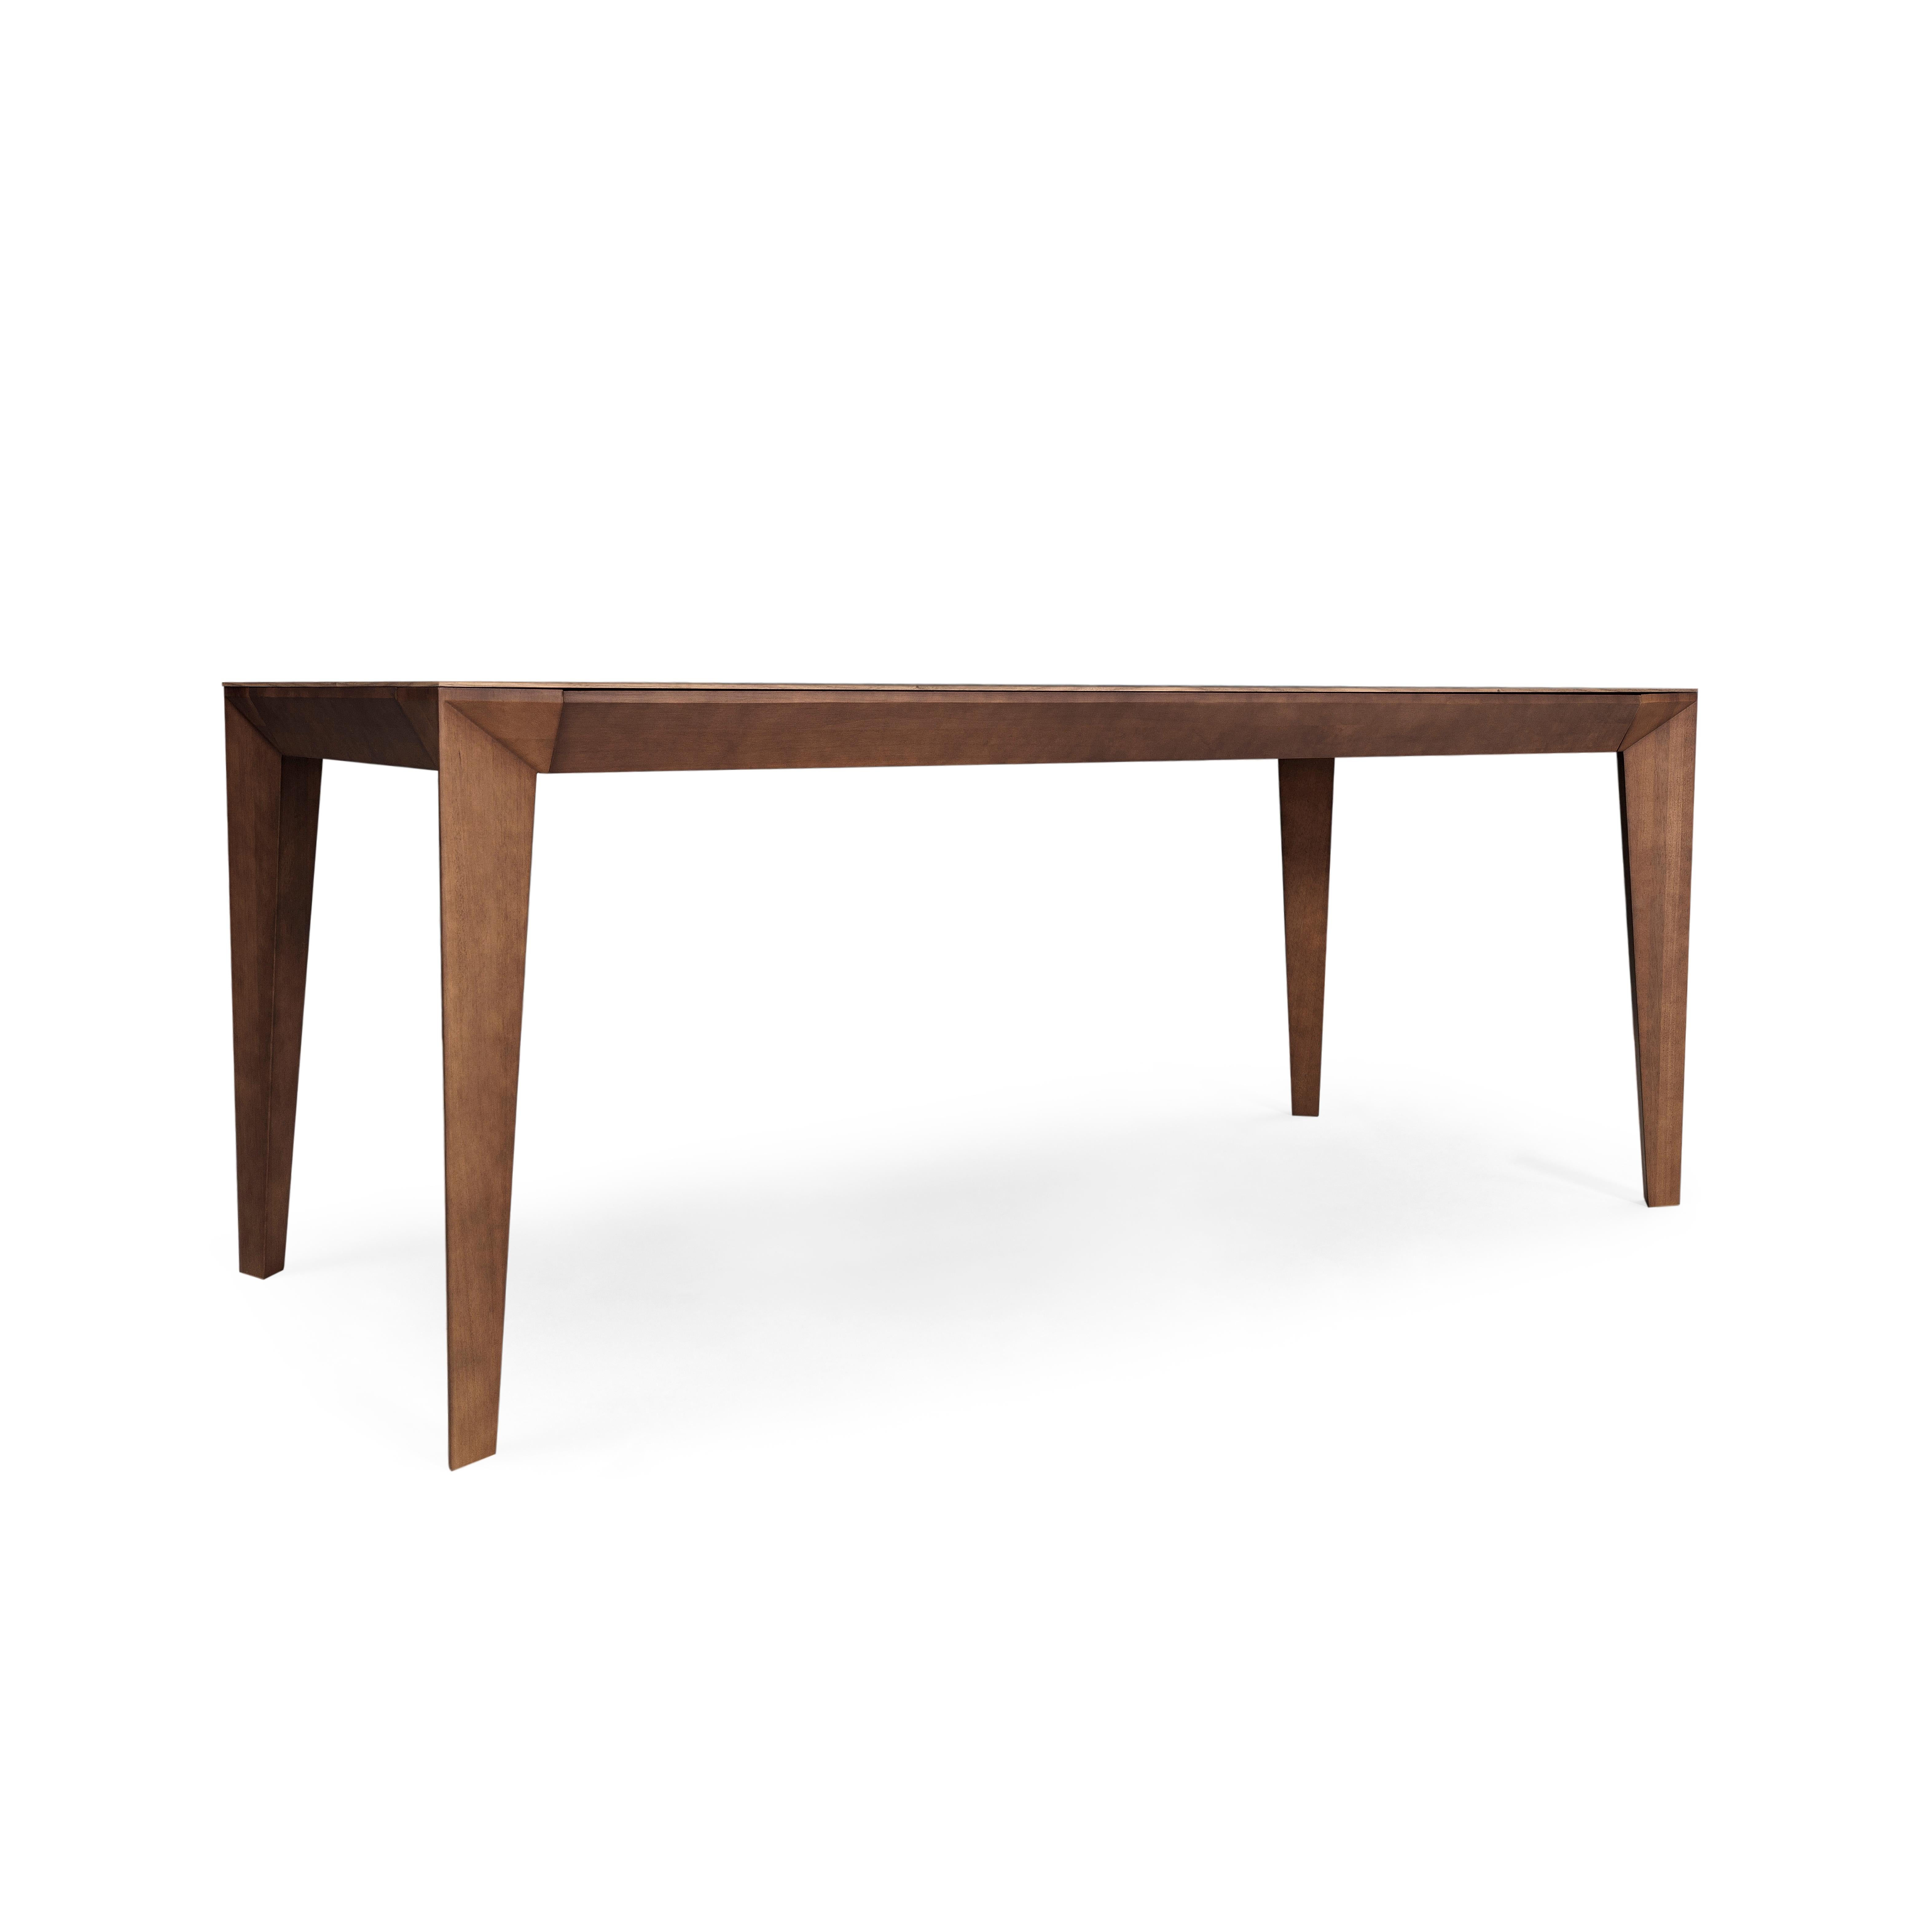 The Luce dining table was made by the Uultis team to bring together simplicity, elegance, and beauty. Using beautiful walnut veneered wood, along with subtle design features such as stunning angular legs. Combining all these details the amazing